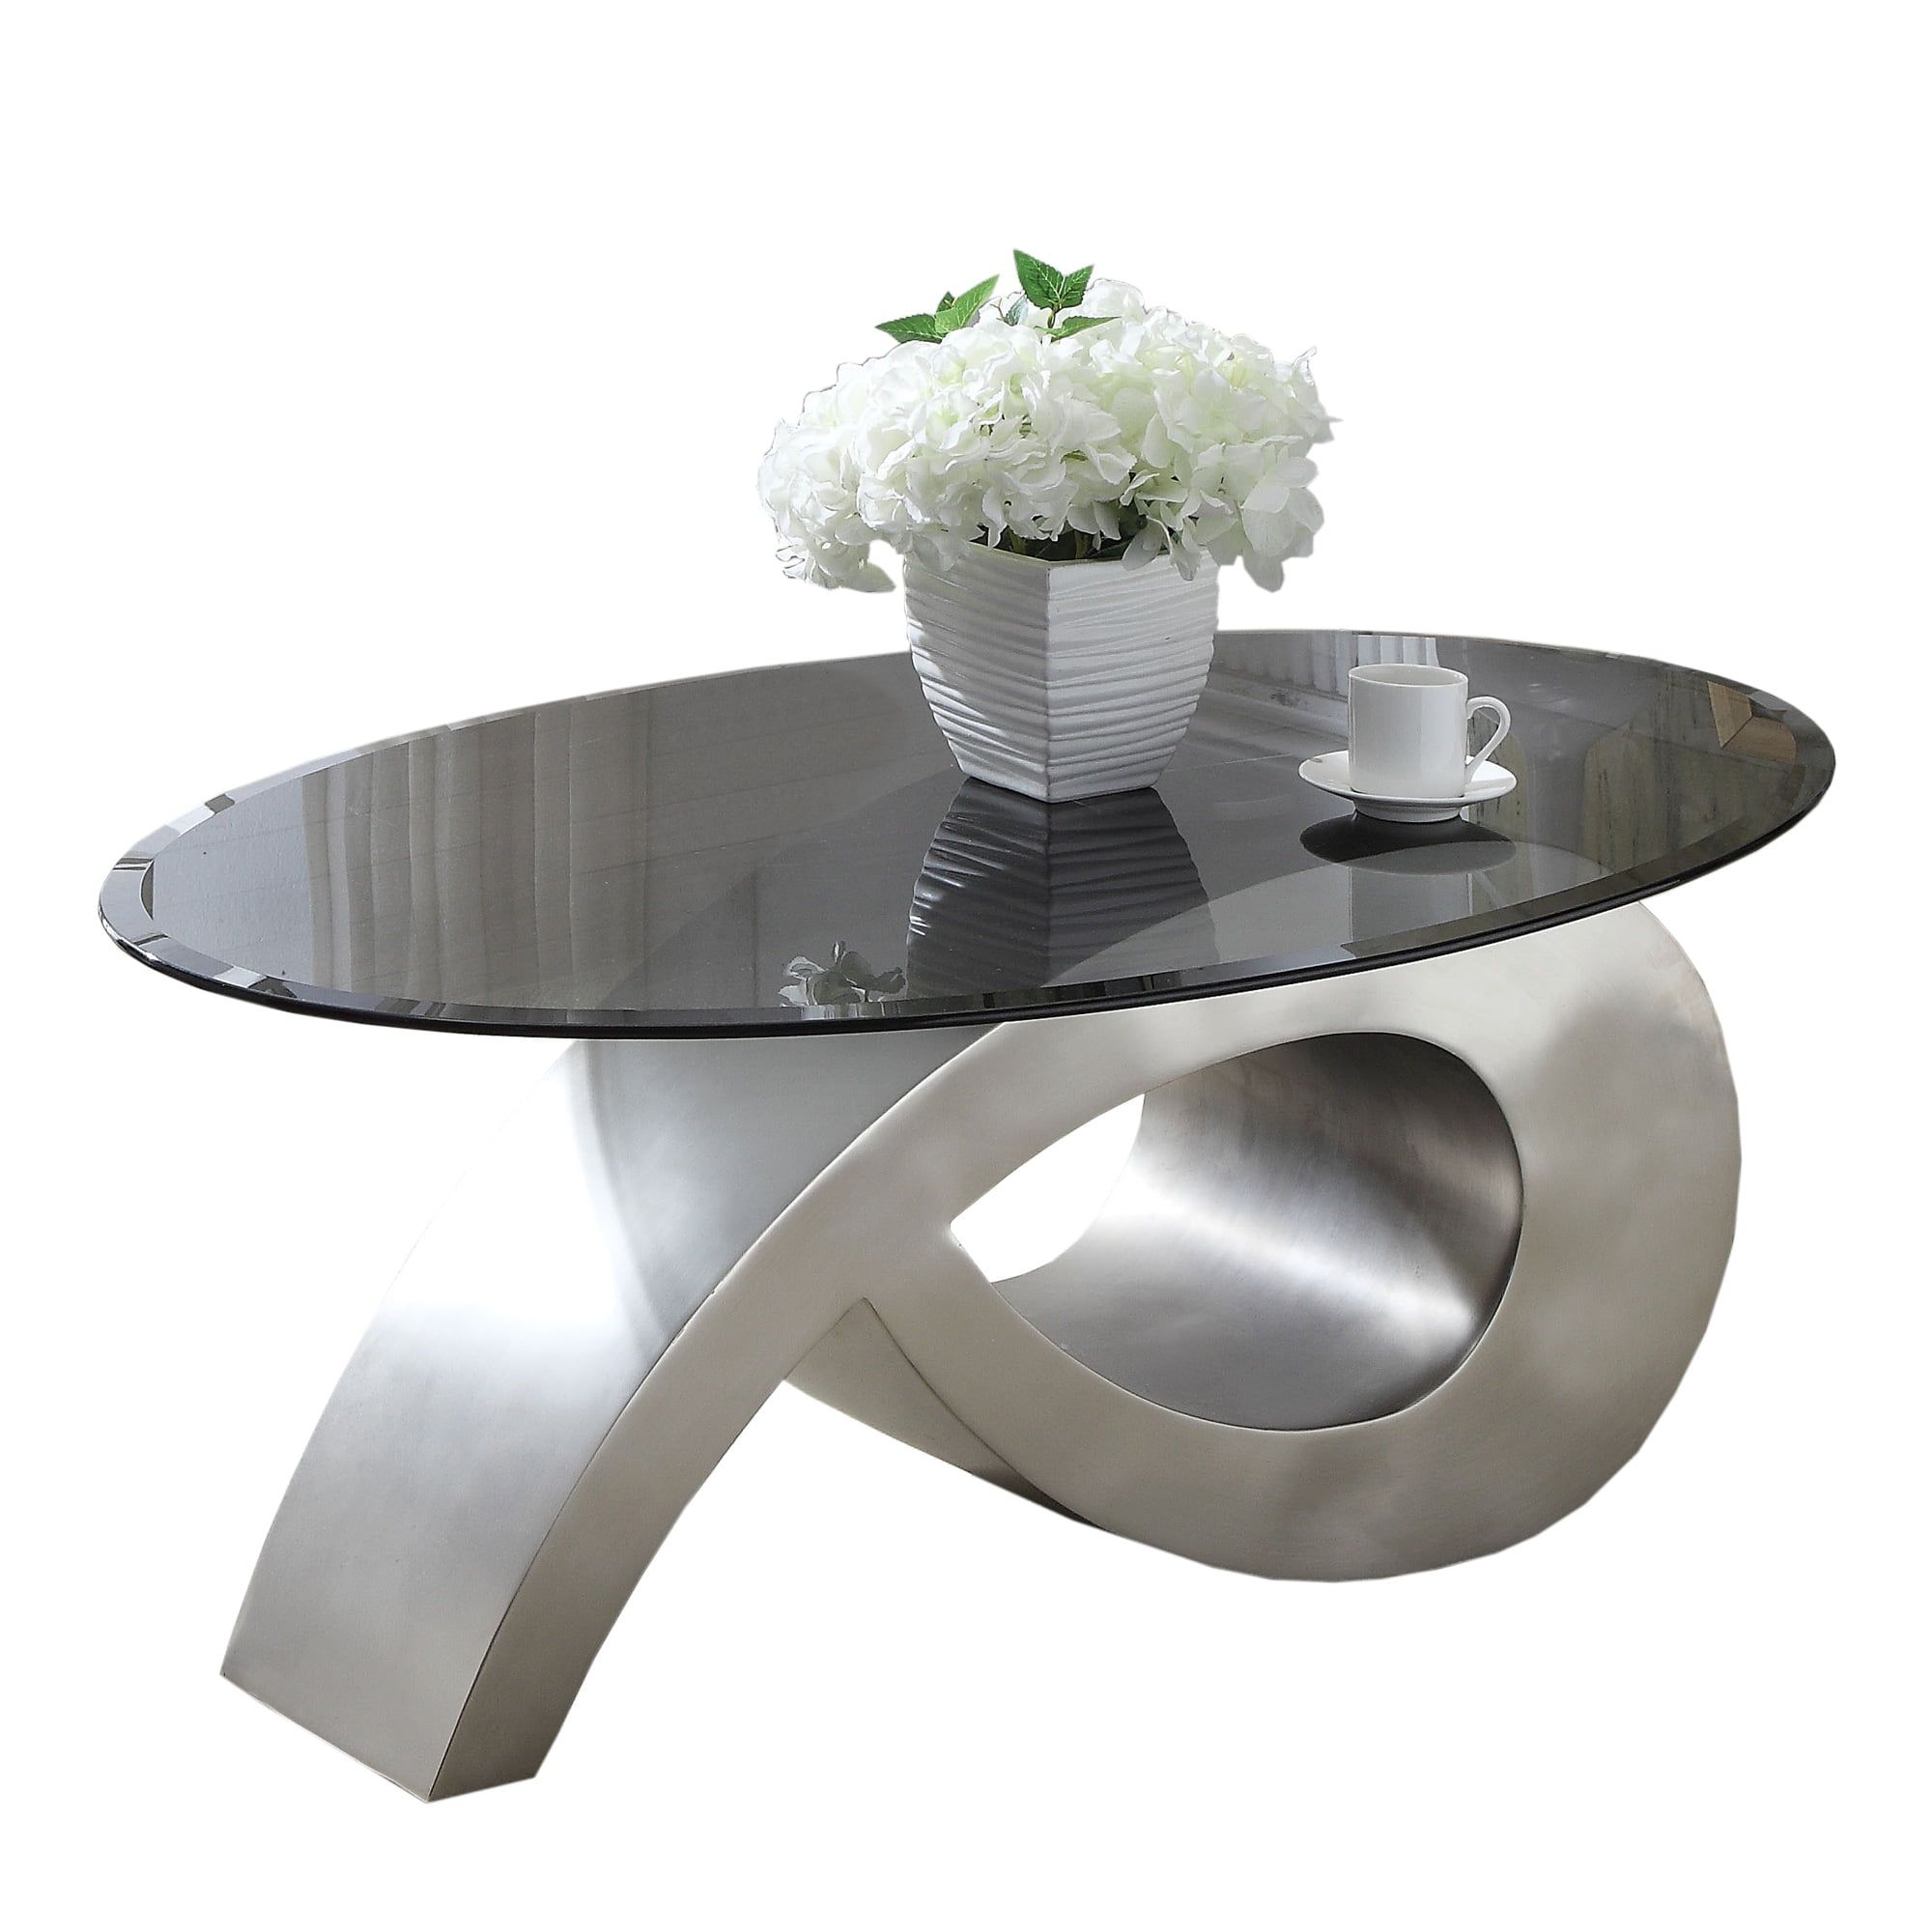 Oval Glass Coffee Table With Unique Metal Base, Black And Silver Intended For Oval Glass Coffee Tables (Gallery 11 of 20)